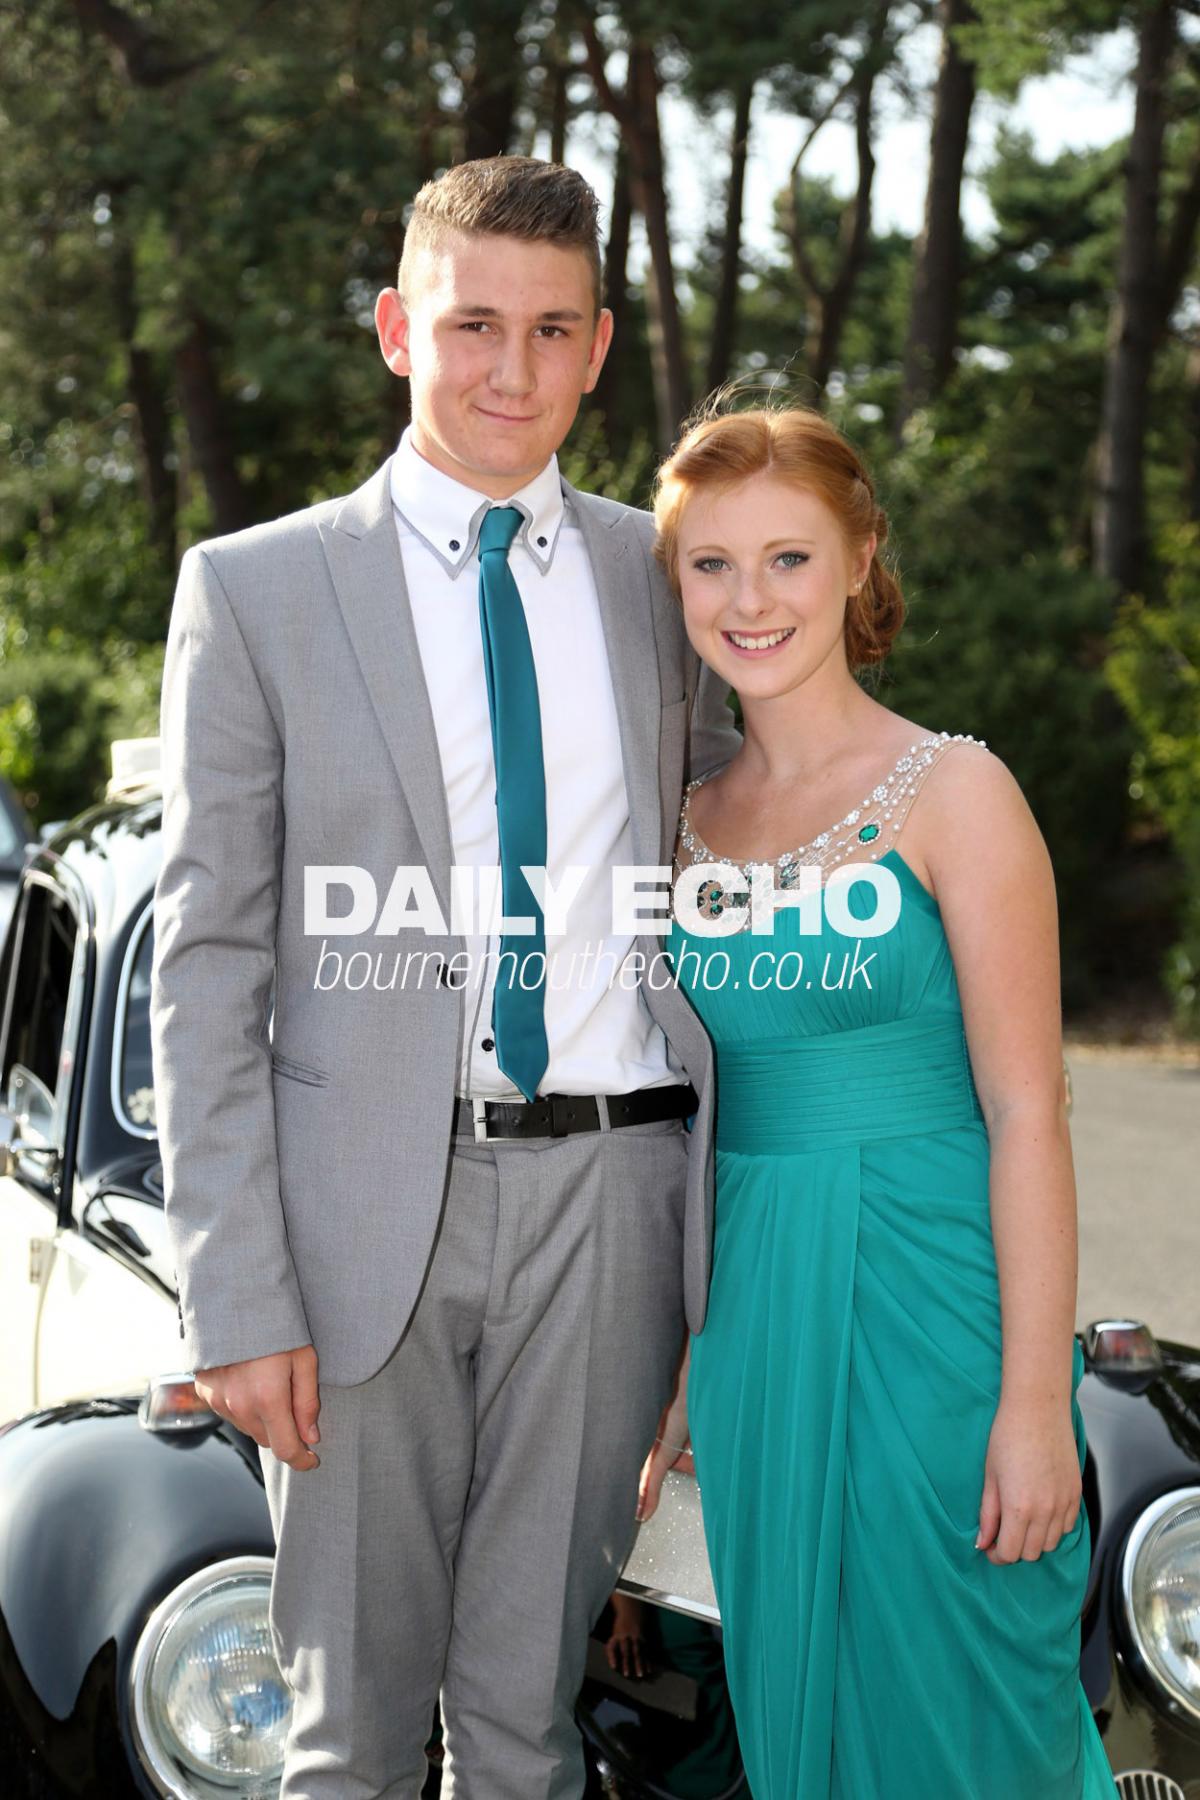 Corfe Hills School Year 11 prom at Compton Acres in Poole on 2nd July 2014